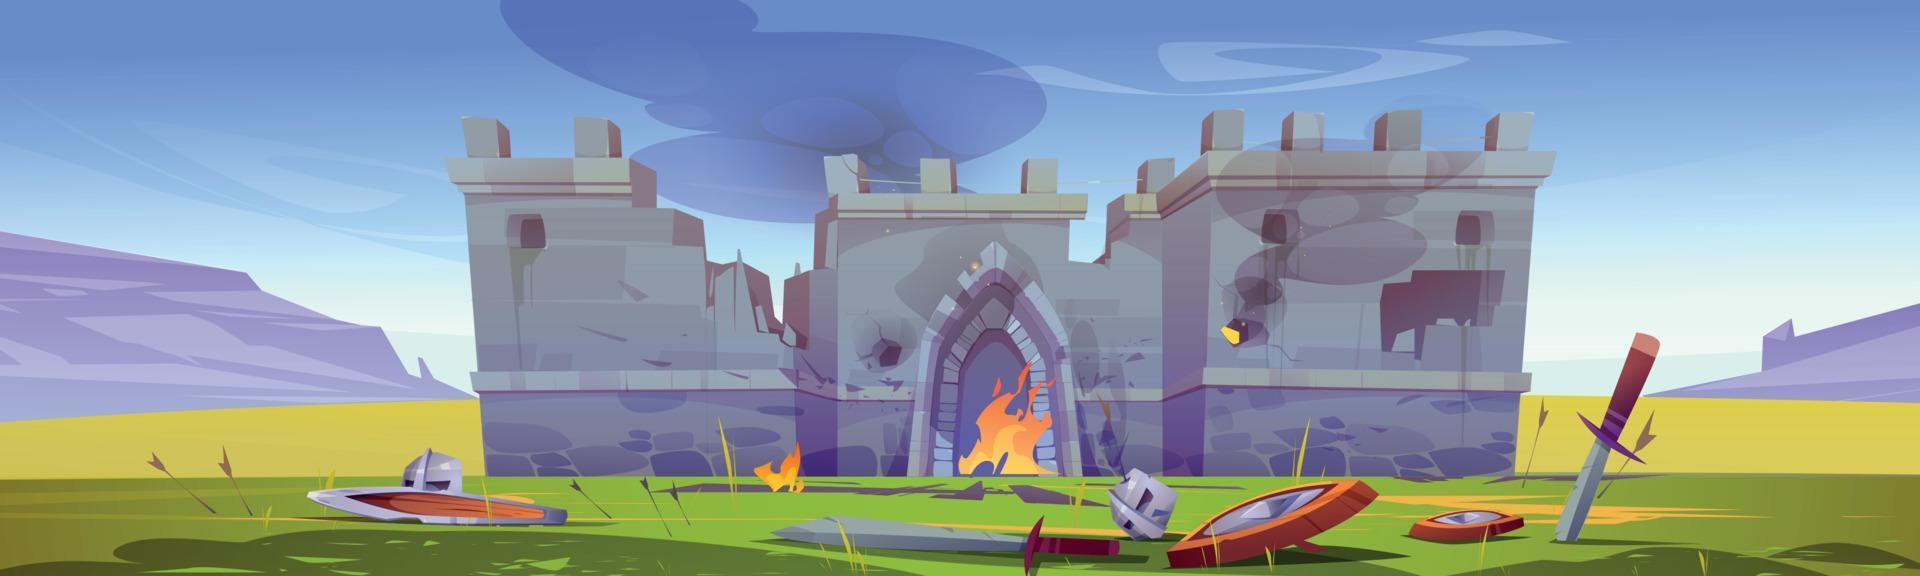 Battle field with old medieval castle in fire vector